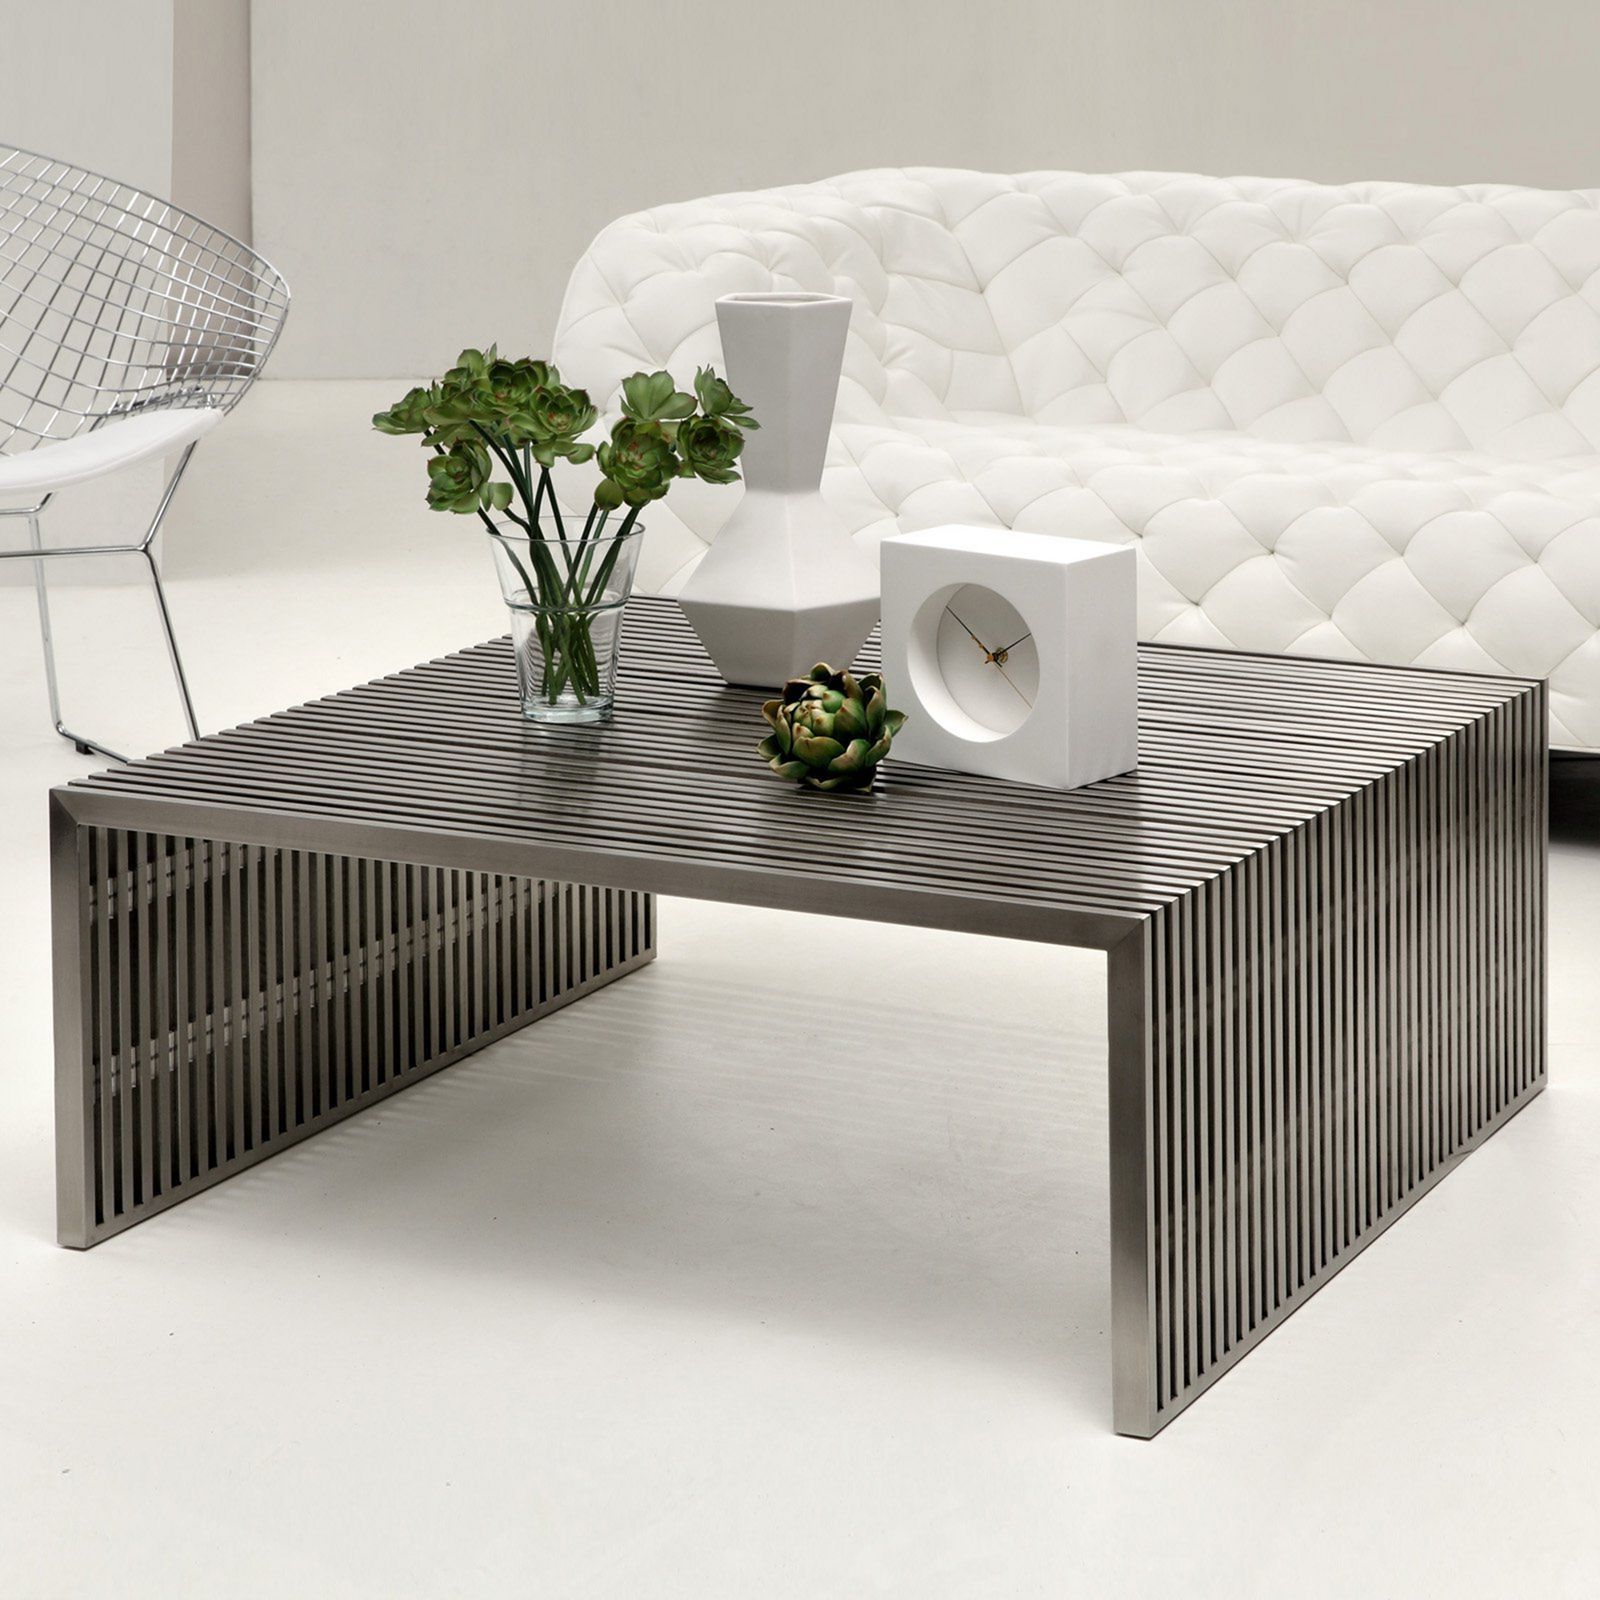 Stainless Steel Coffee Tables – Ideas On Foter Pertaining To Current Brushed Stainless Steel Coffee Tables (View 8 of 20)